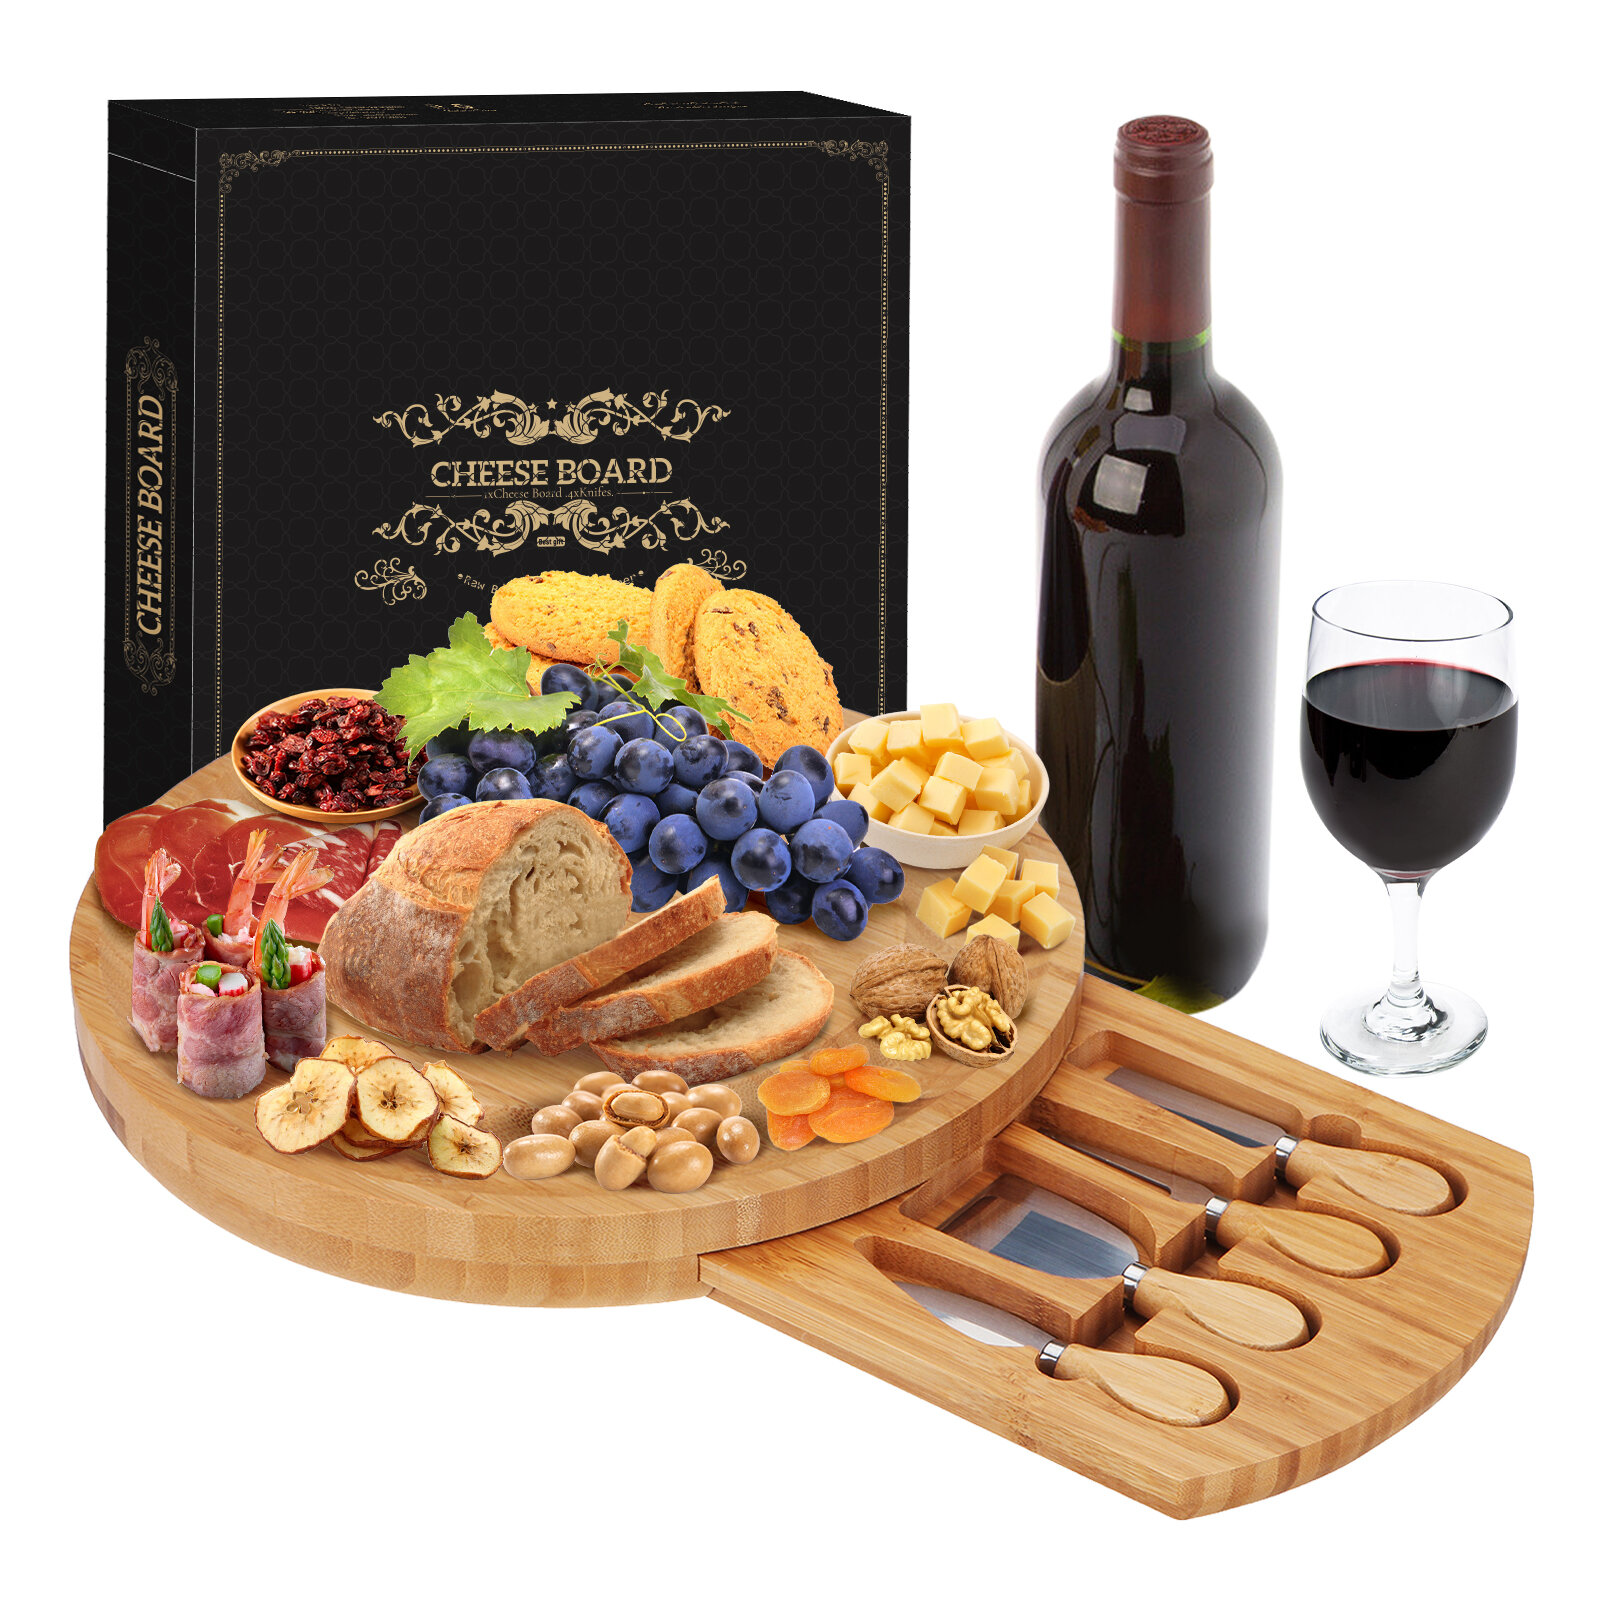 Cheese Cutting Board and Cheese Serving Platter Bamboo Tray and Knife Set Included 4 Steel Knife Four-Piece Cheese Plate Pull for Meat Wine & Cheese Entertaining